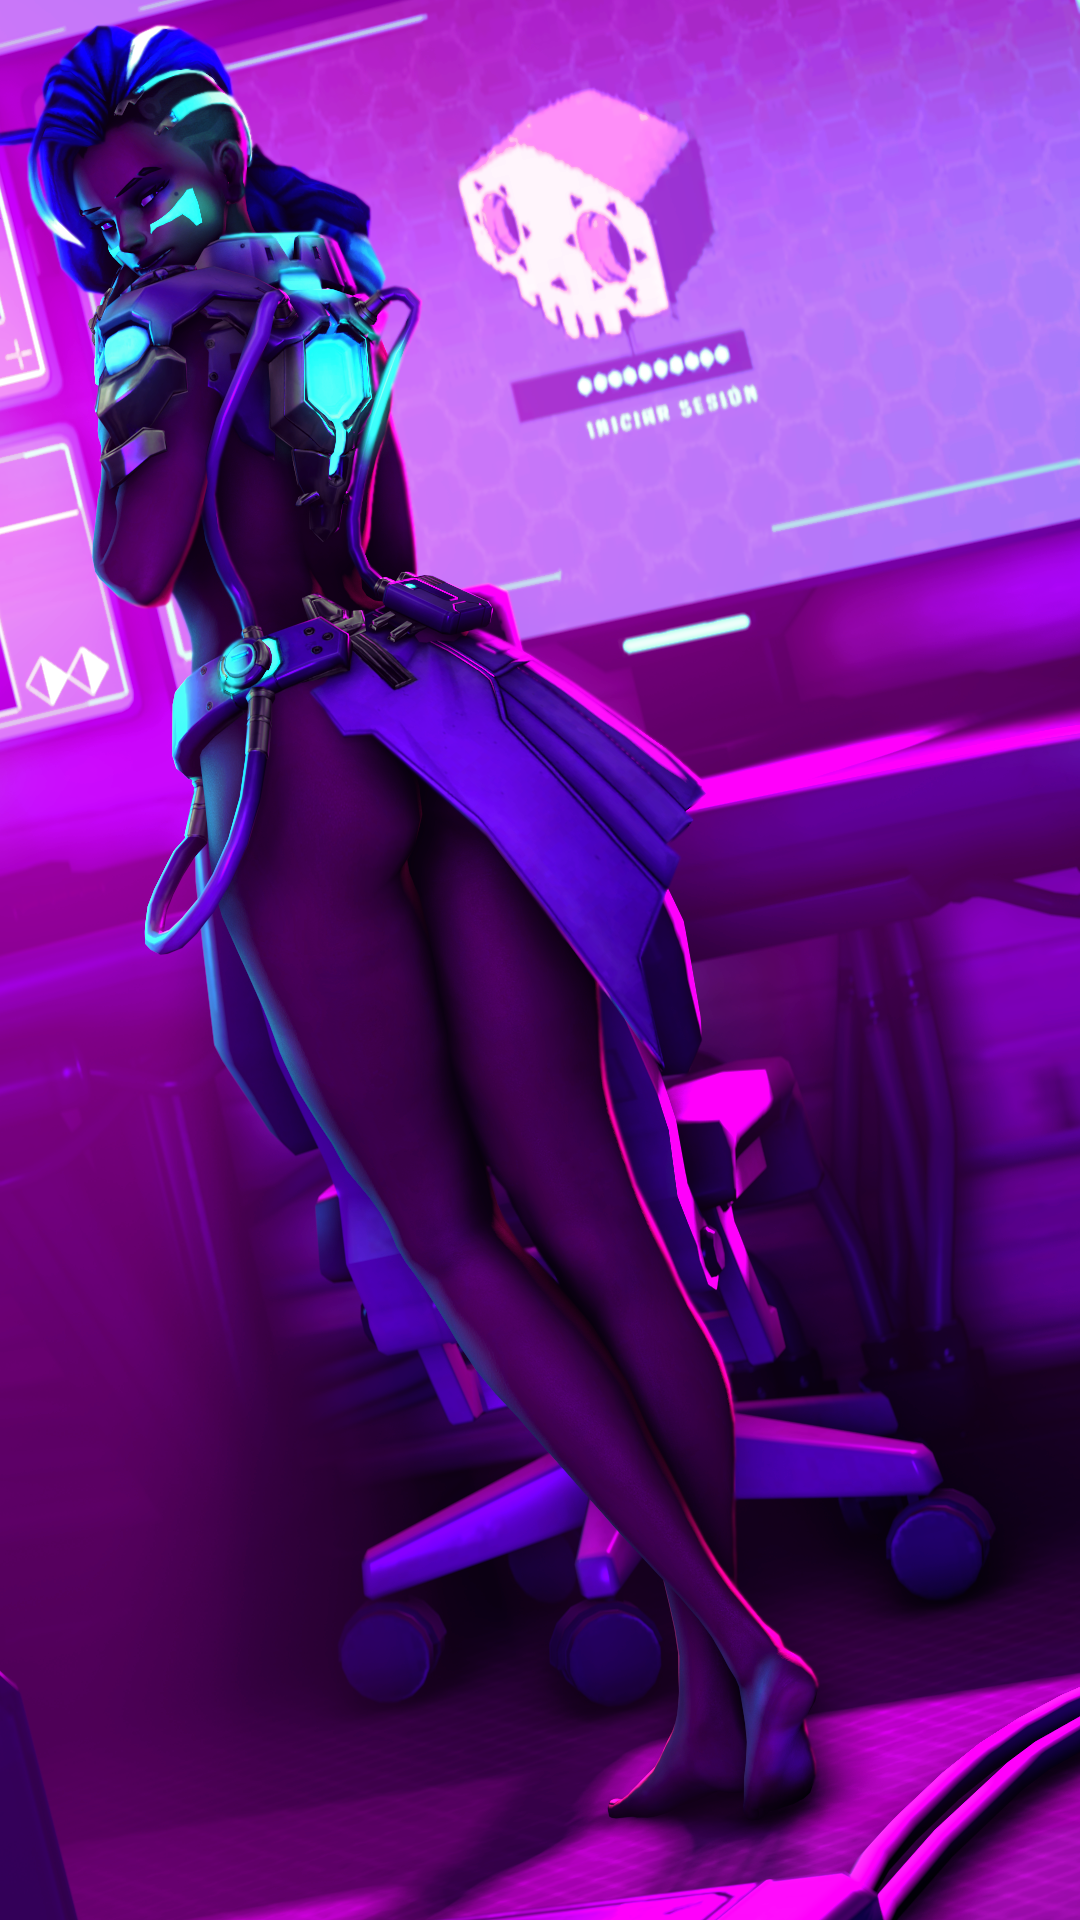 myotherhalff-sfm: Sombra Found out this model was released as soon as I posted my